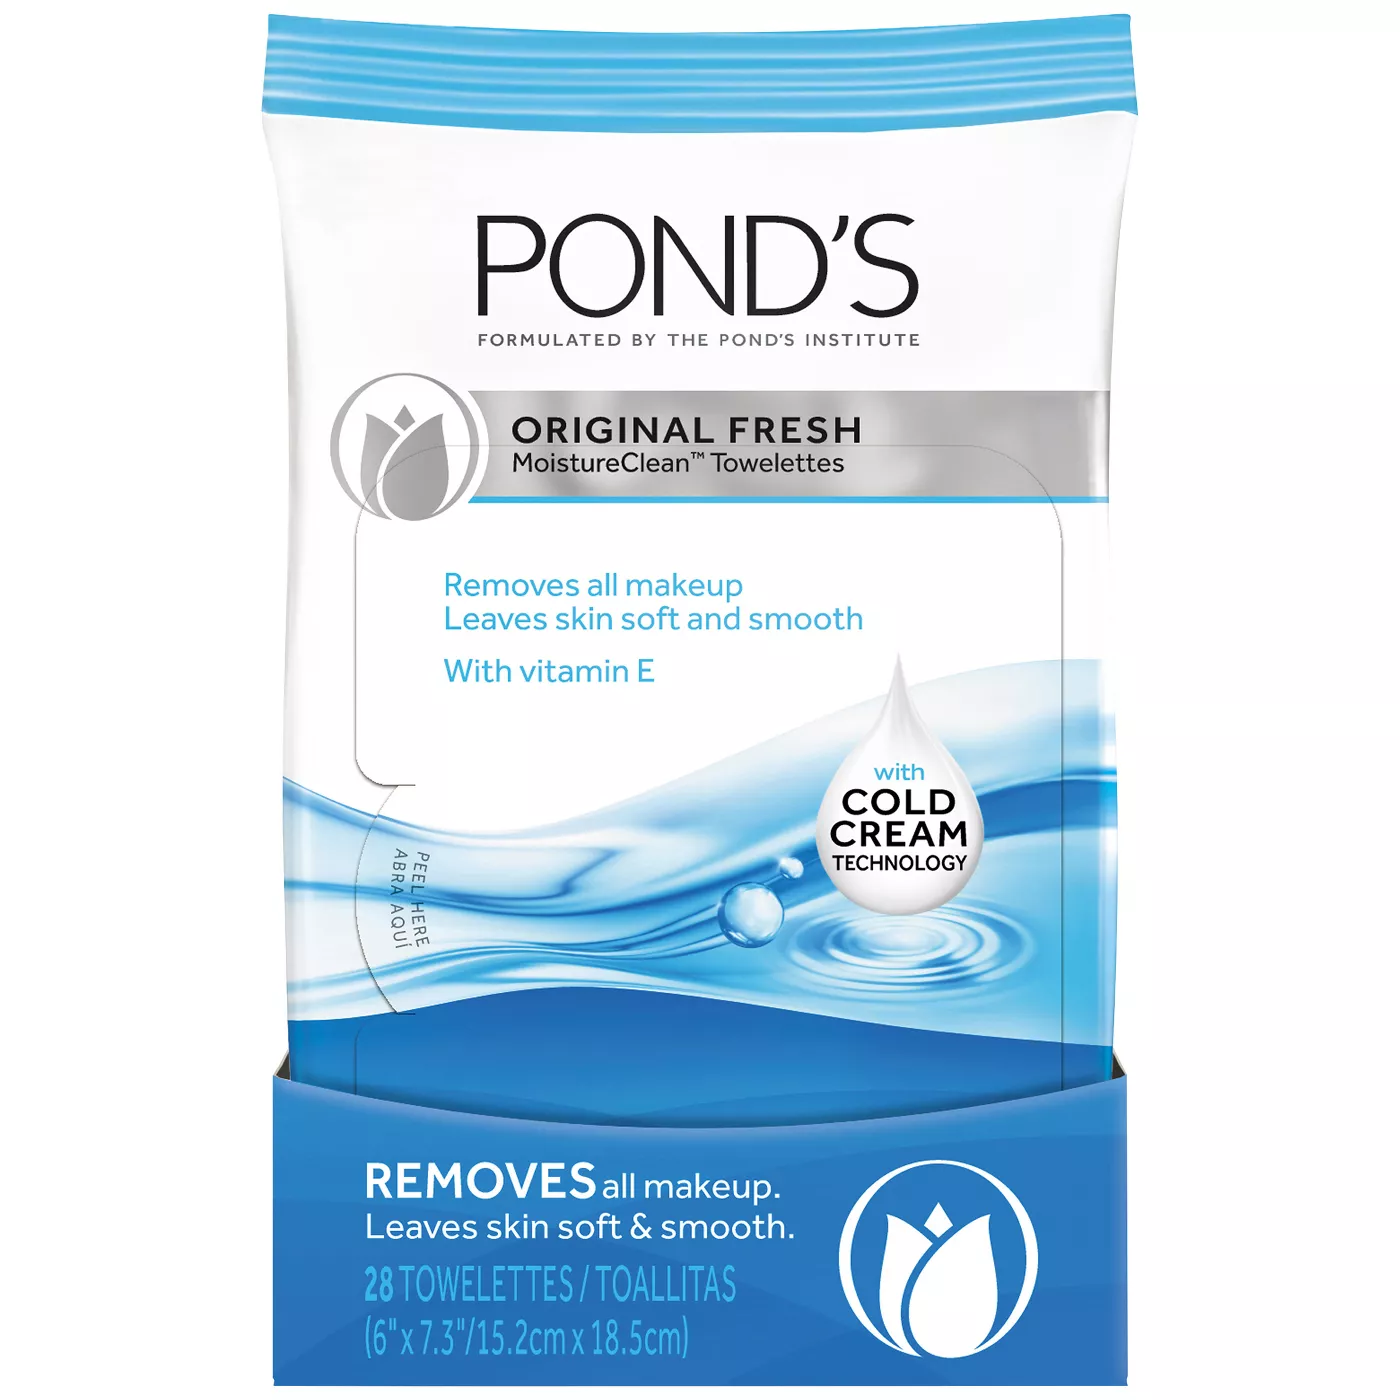 Pond's Wet Cleansing Towelettes Original Fresh - 28ct - image 1 of 8